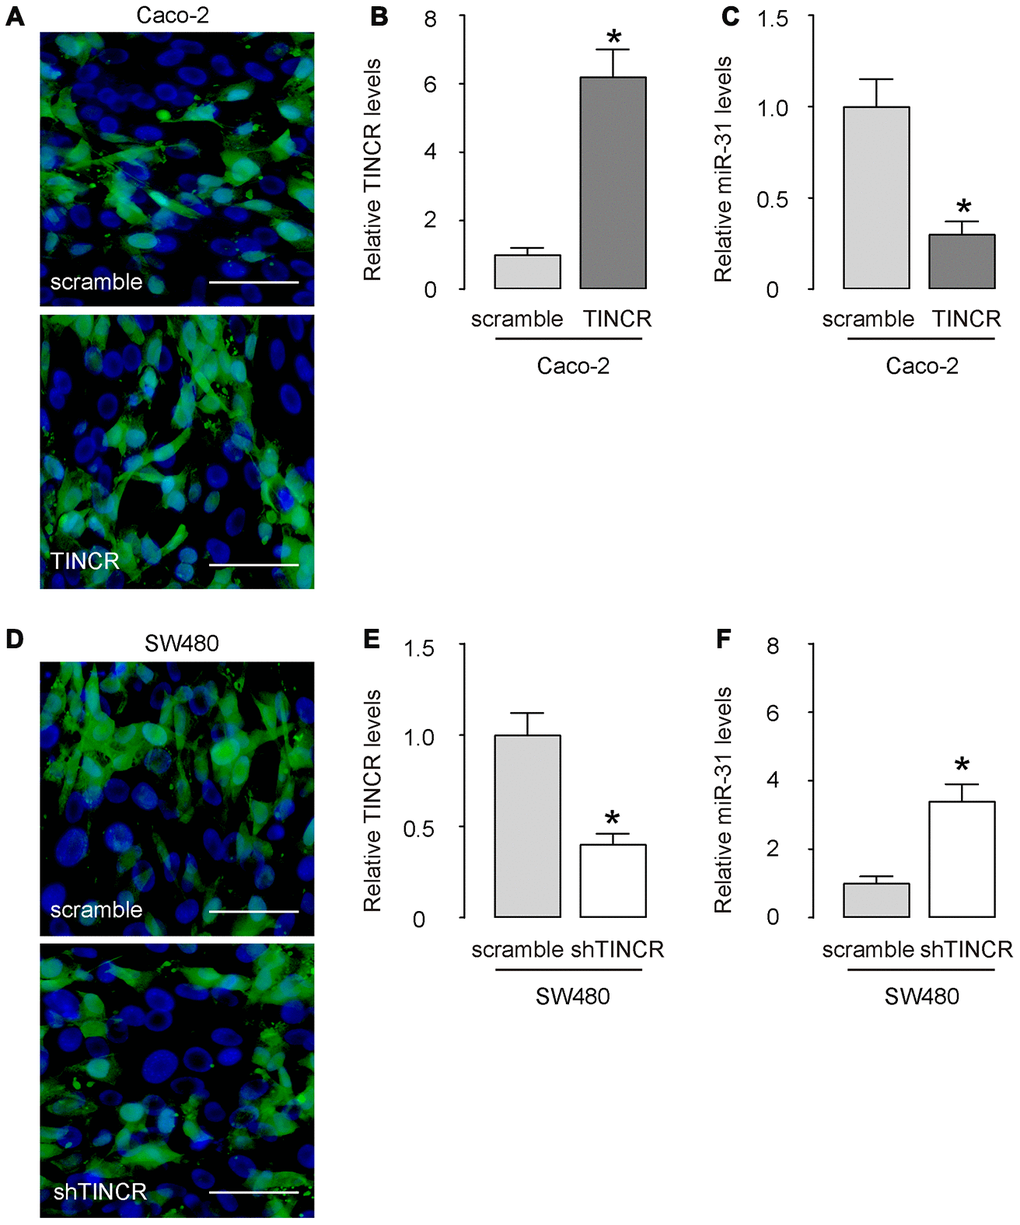 Overexpression or depletion of TINCR in CRCs. (A–C) Transfection with TINCR or scramble in Caco-2 cells, shown by representative cell images in culture (A), and by RT-qPCR for TINCR (B) and for miR-31 (C). (D, E) Transfection with shTINCR or scramble in SW480 cells, shown by representative cell images in culture (D), and by RT-qPCR for TINCR (E) and for miR-31 (F). N=5. *p